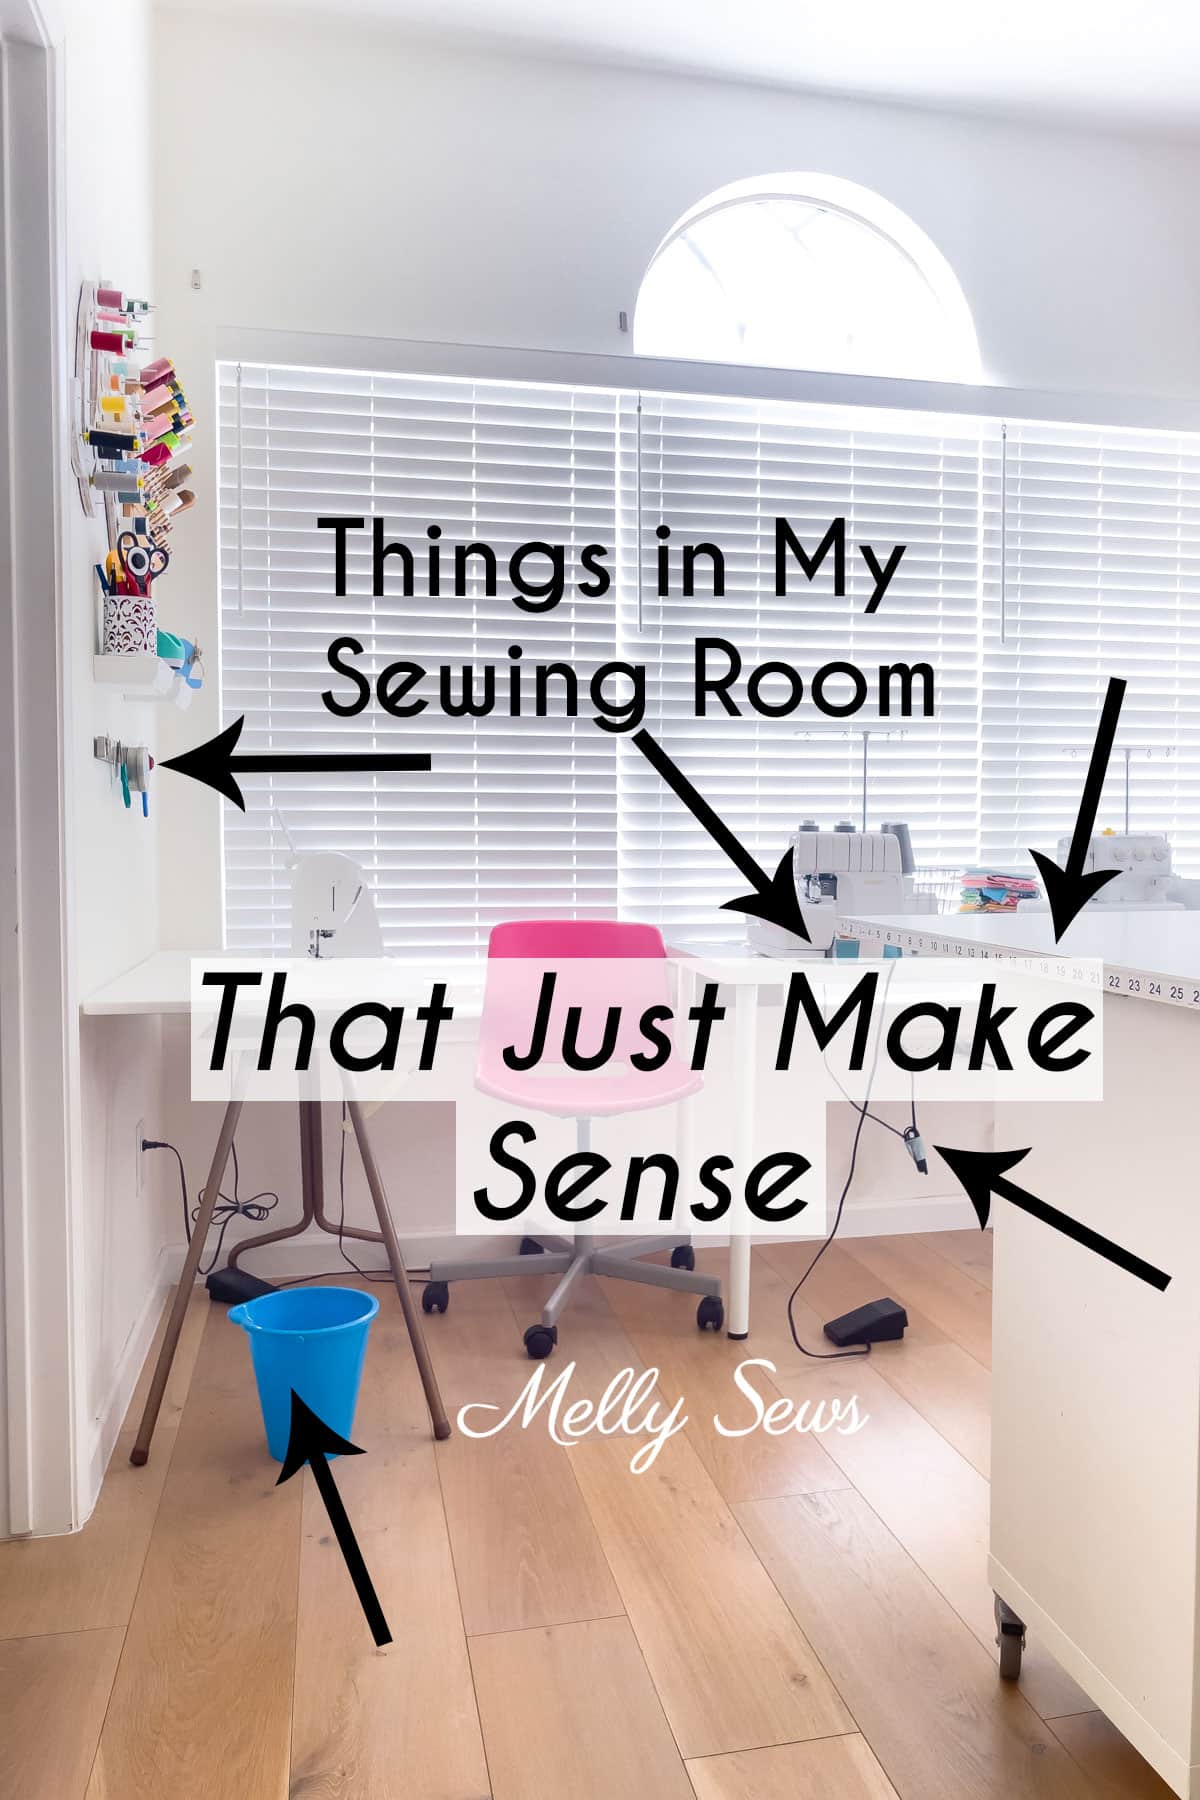 Sewing for Beginners - 5 Must Have Sewing Tools - Melly Sews